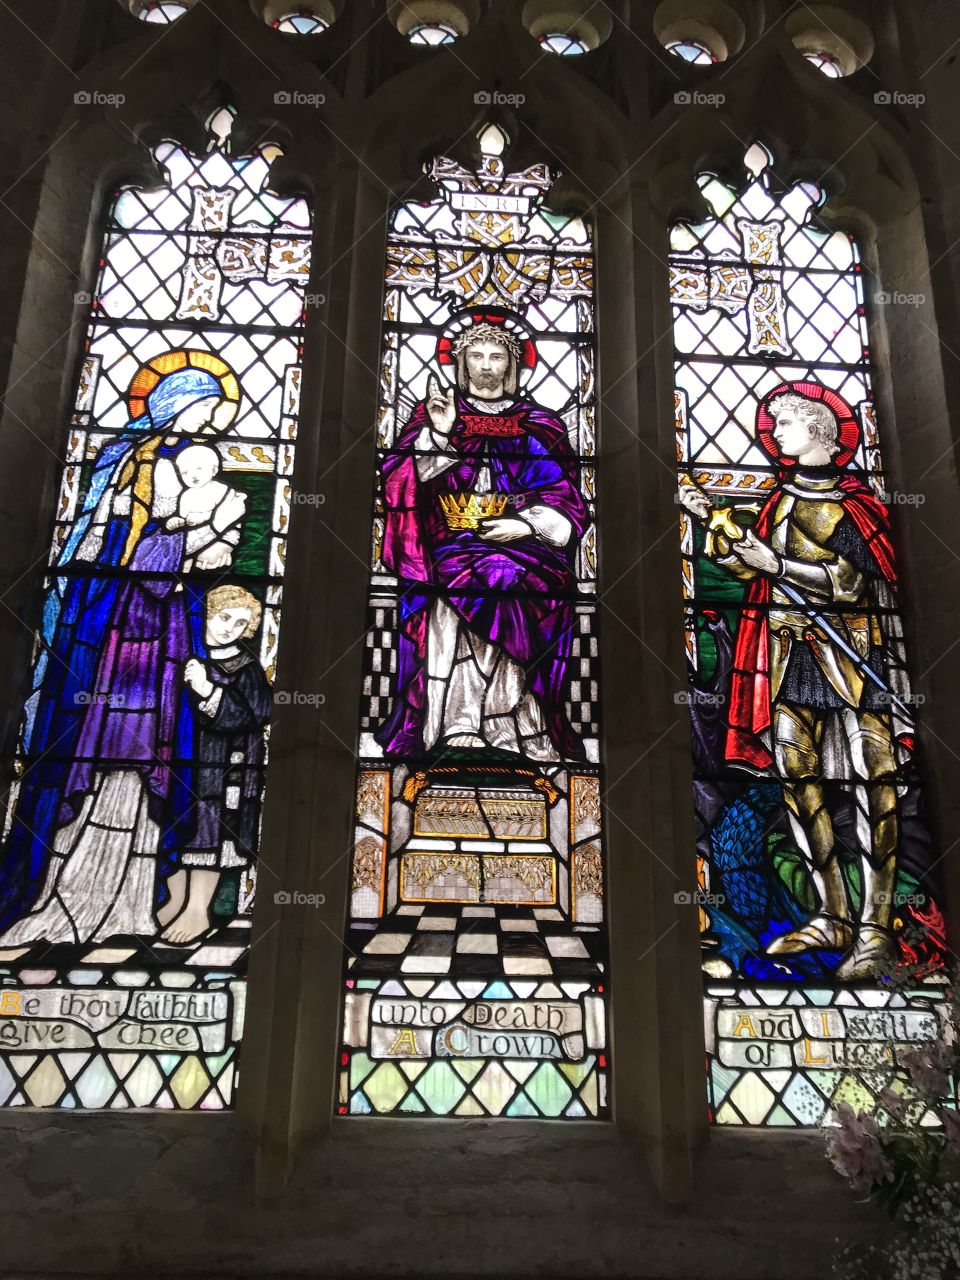 One of Dorset’s finest stain glass windows, to be found at St Mary’s Church, Burton Bradstock near Bridport.